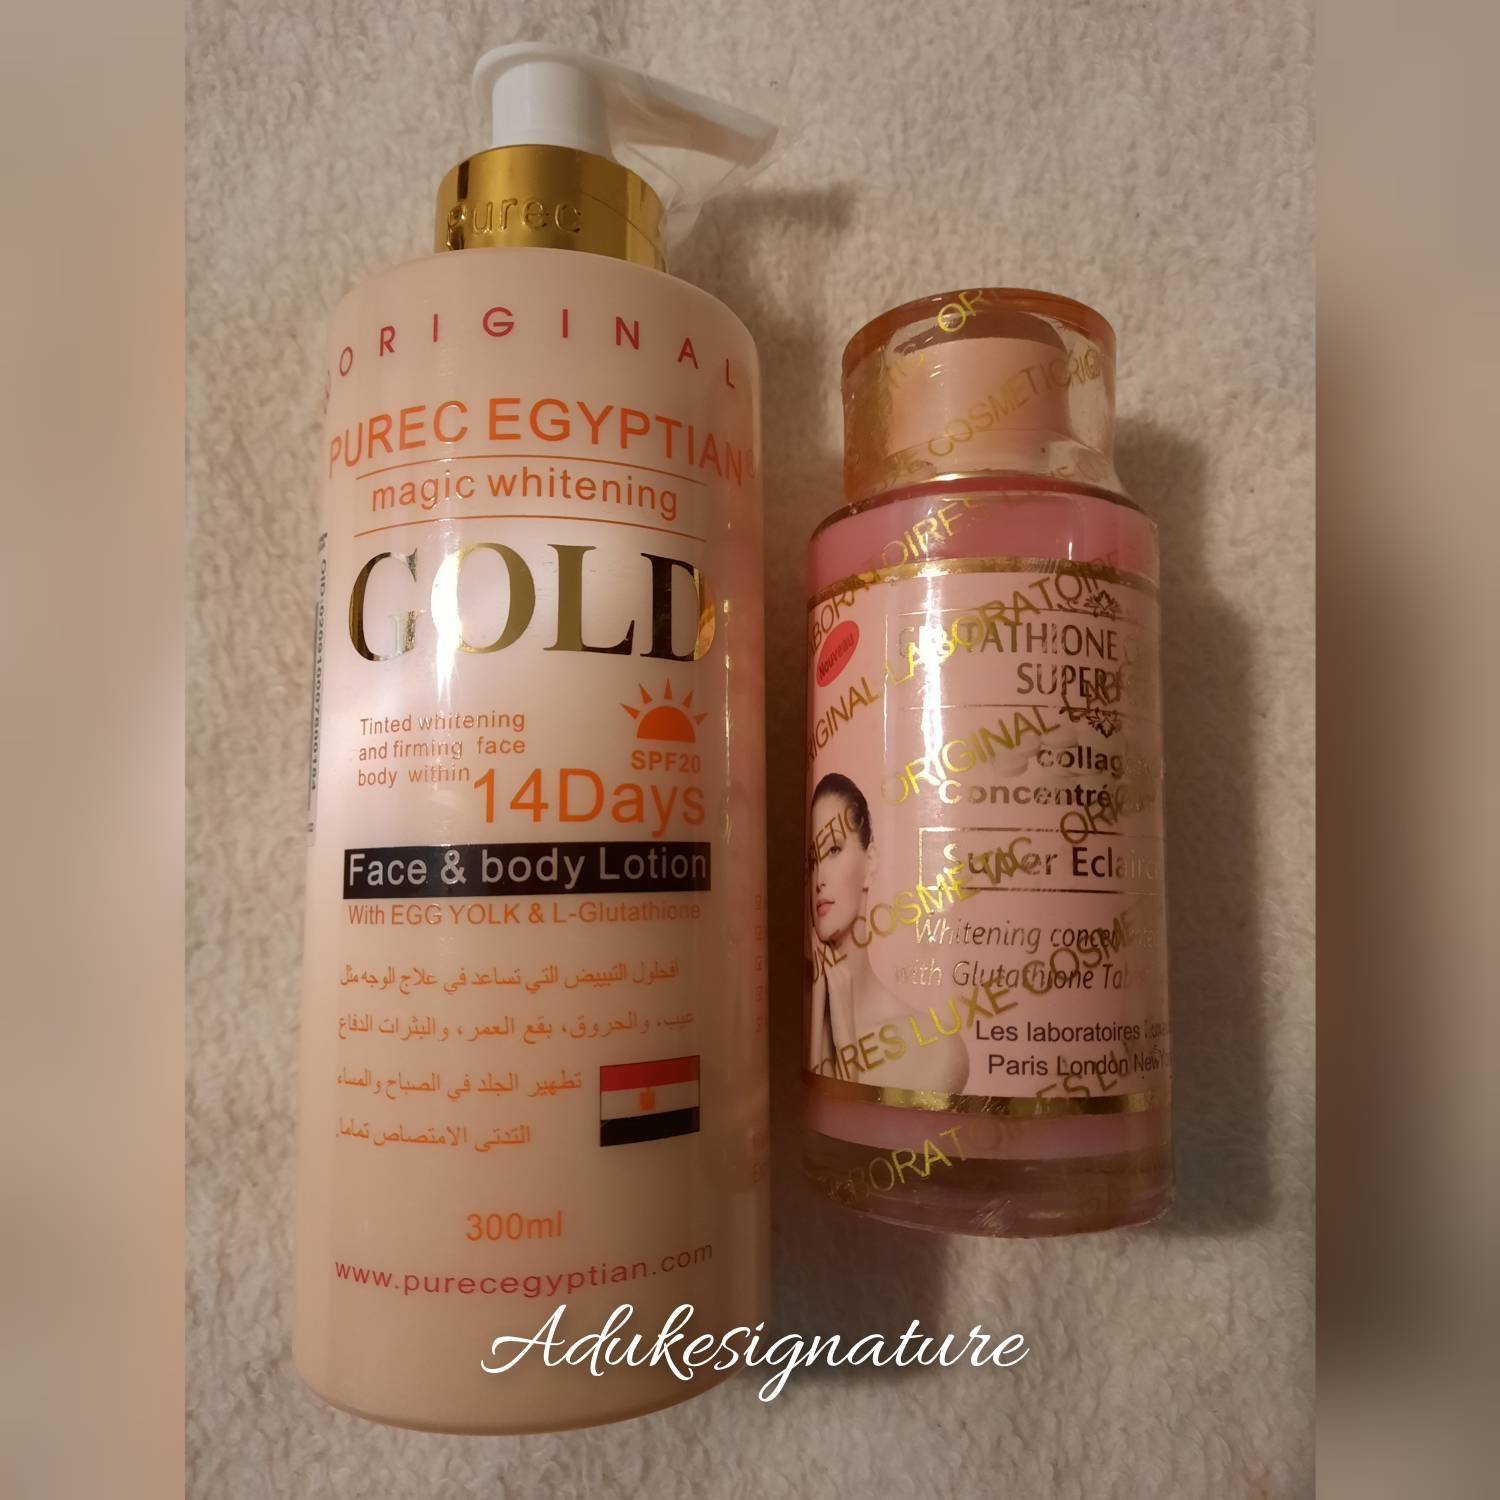 Purec Egyptian gold face body lotion and Glutathion comprime serum